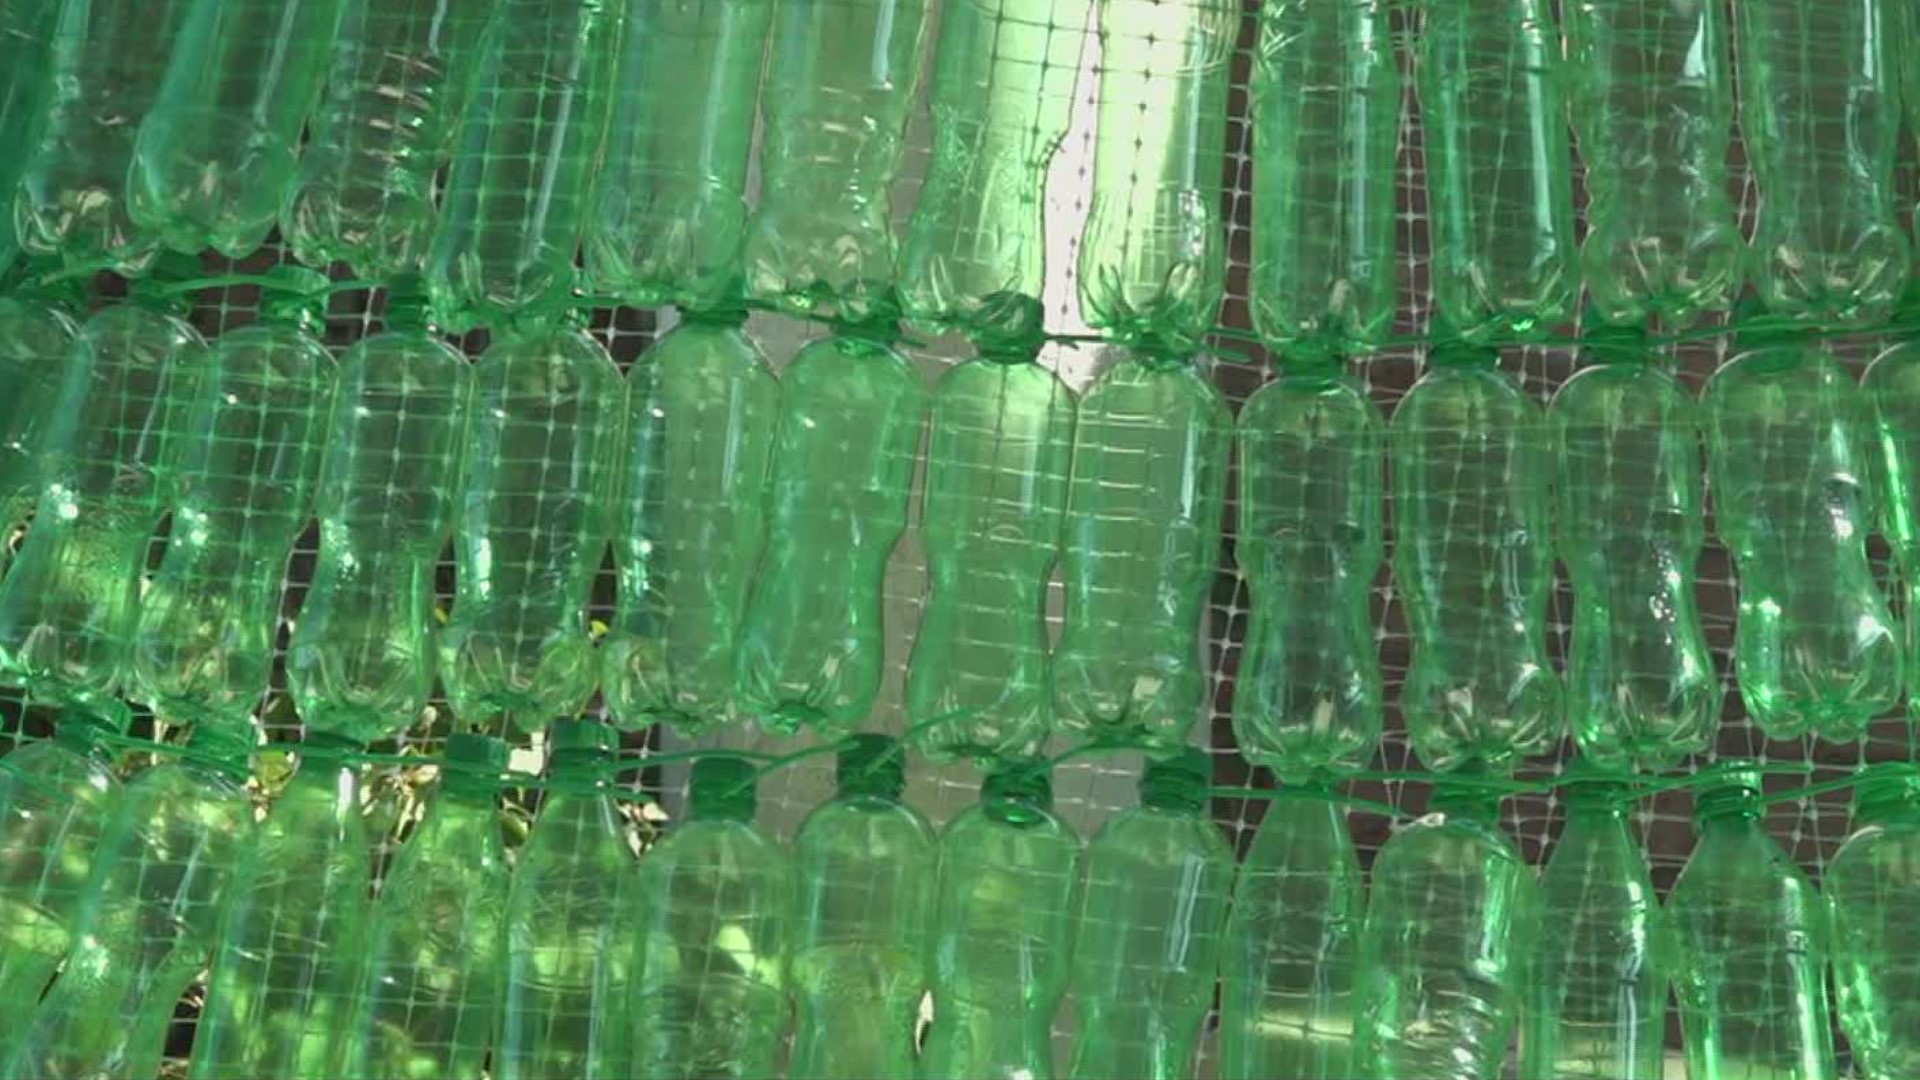 The project will consist of 4,000 green bottles.